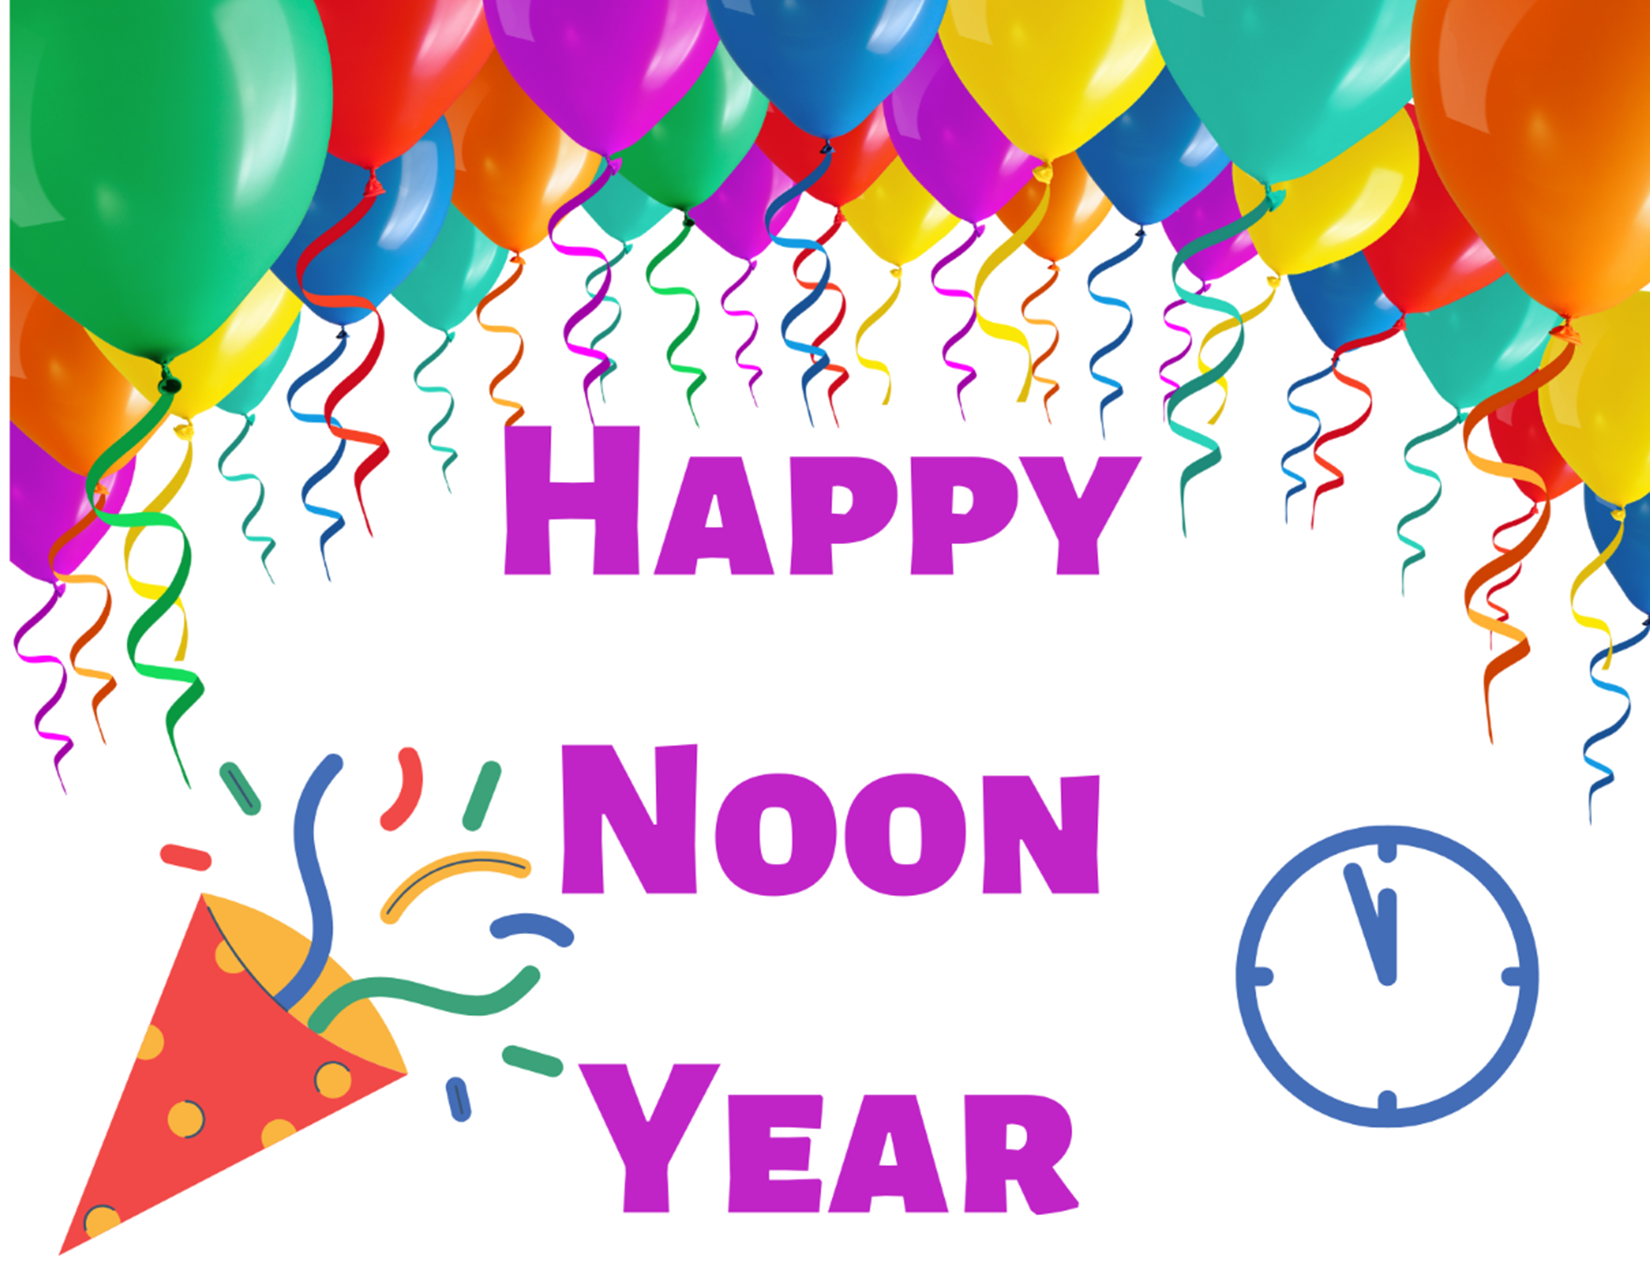 Happy Noon Year graphic